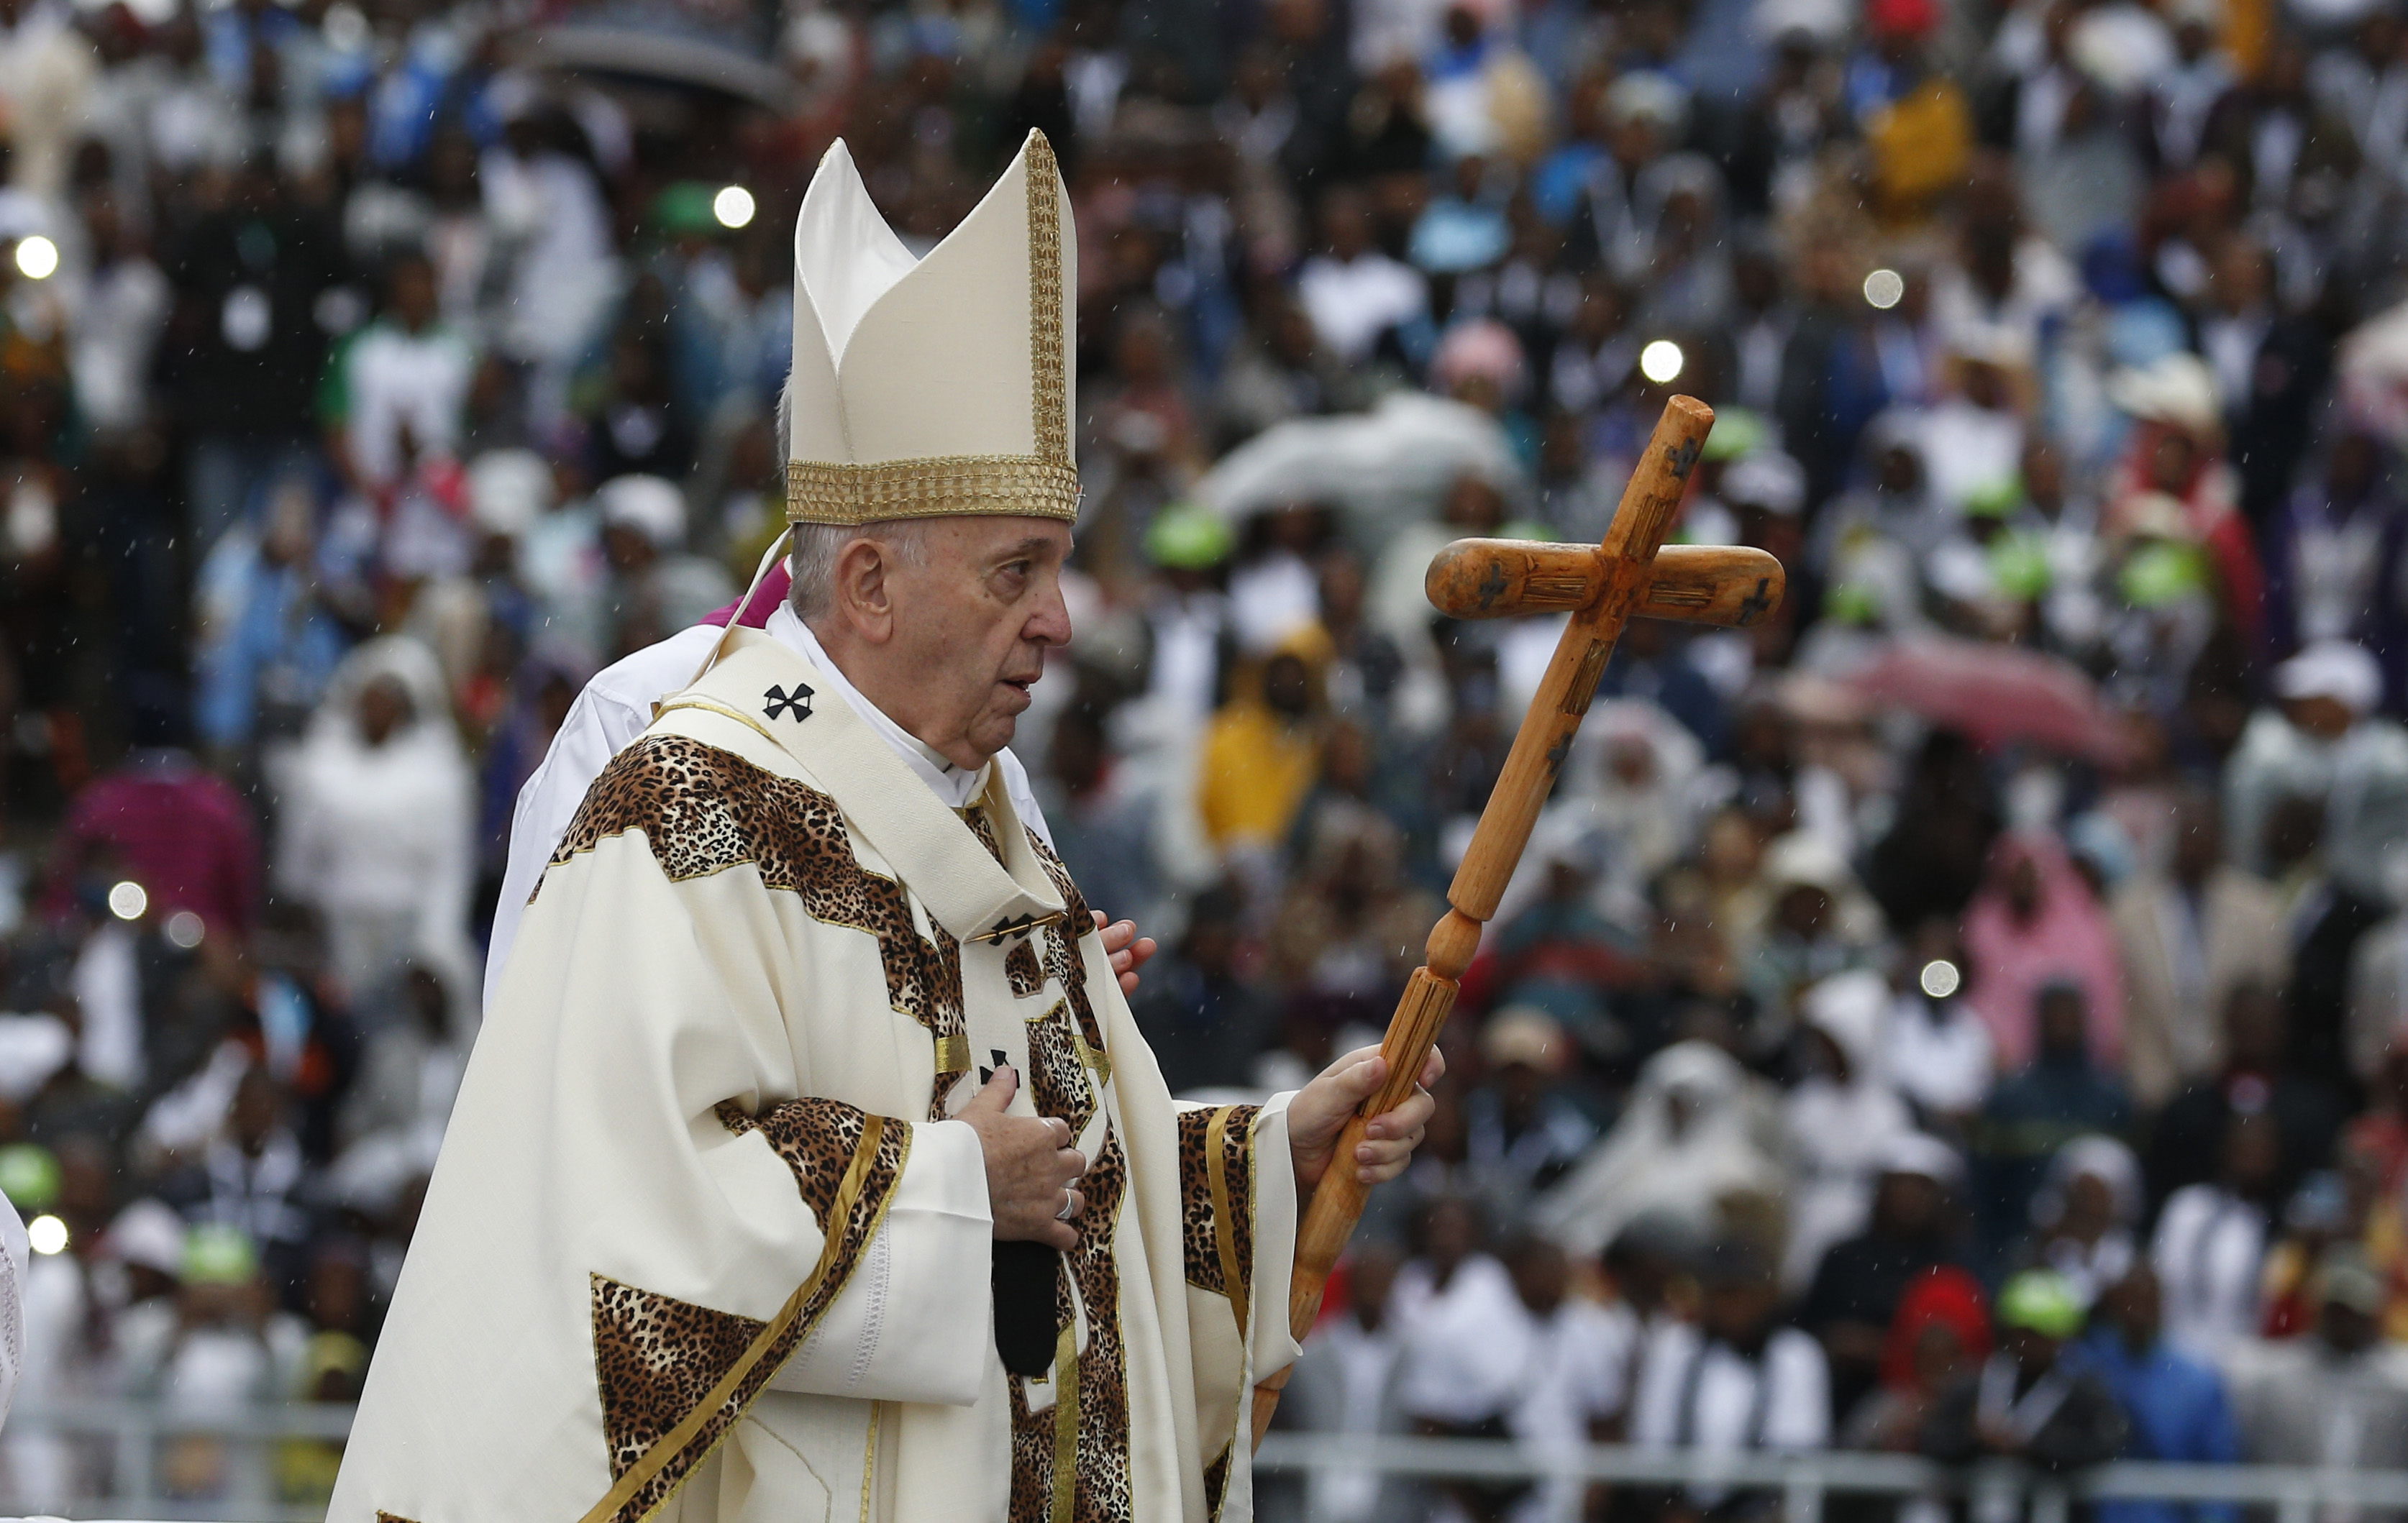 Pope leaves Mozambique urging reconciliation, care for one another